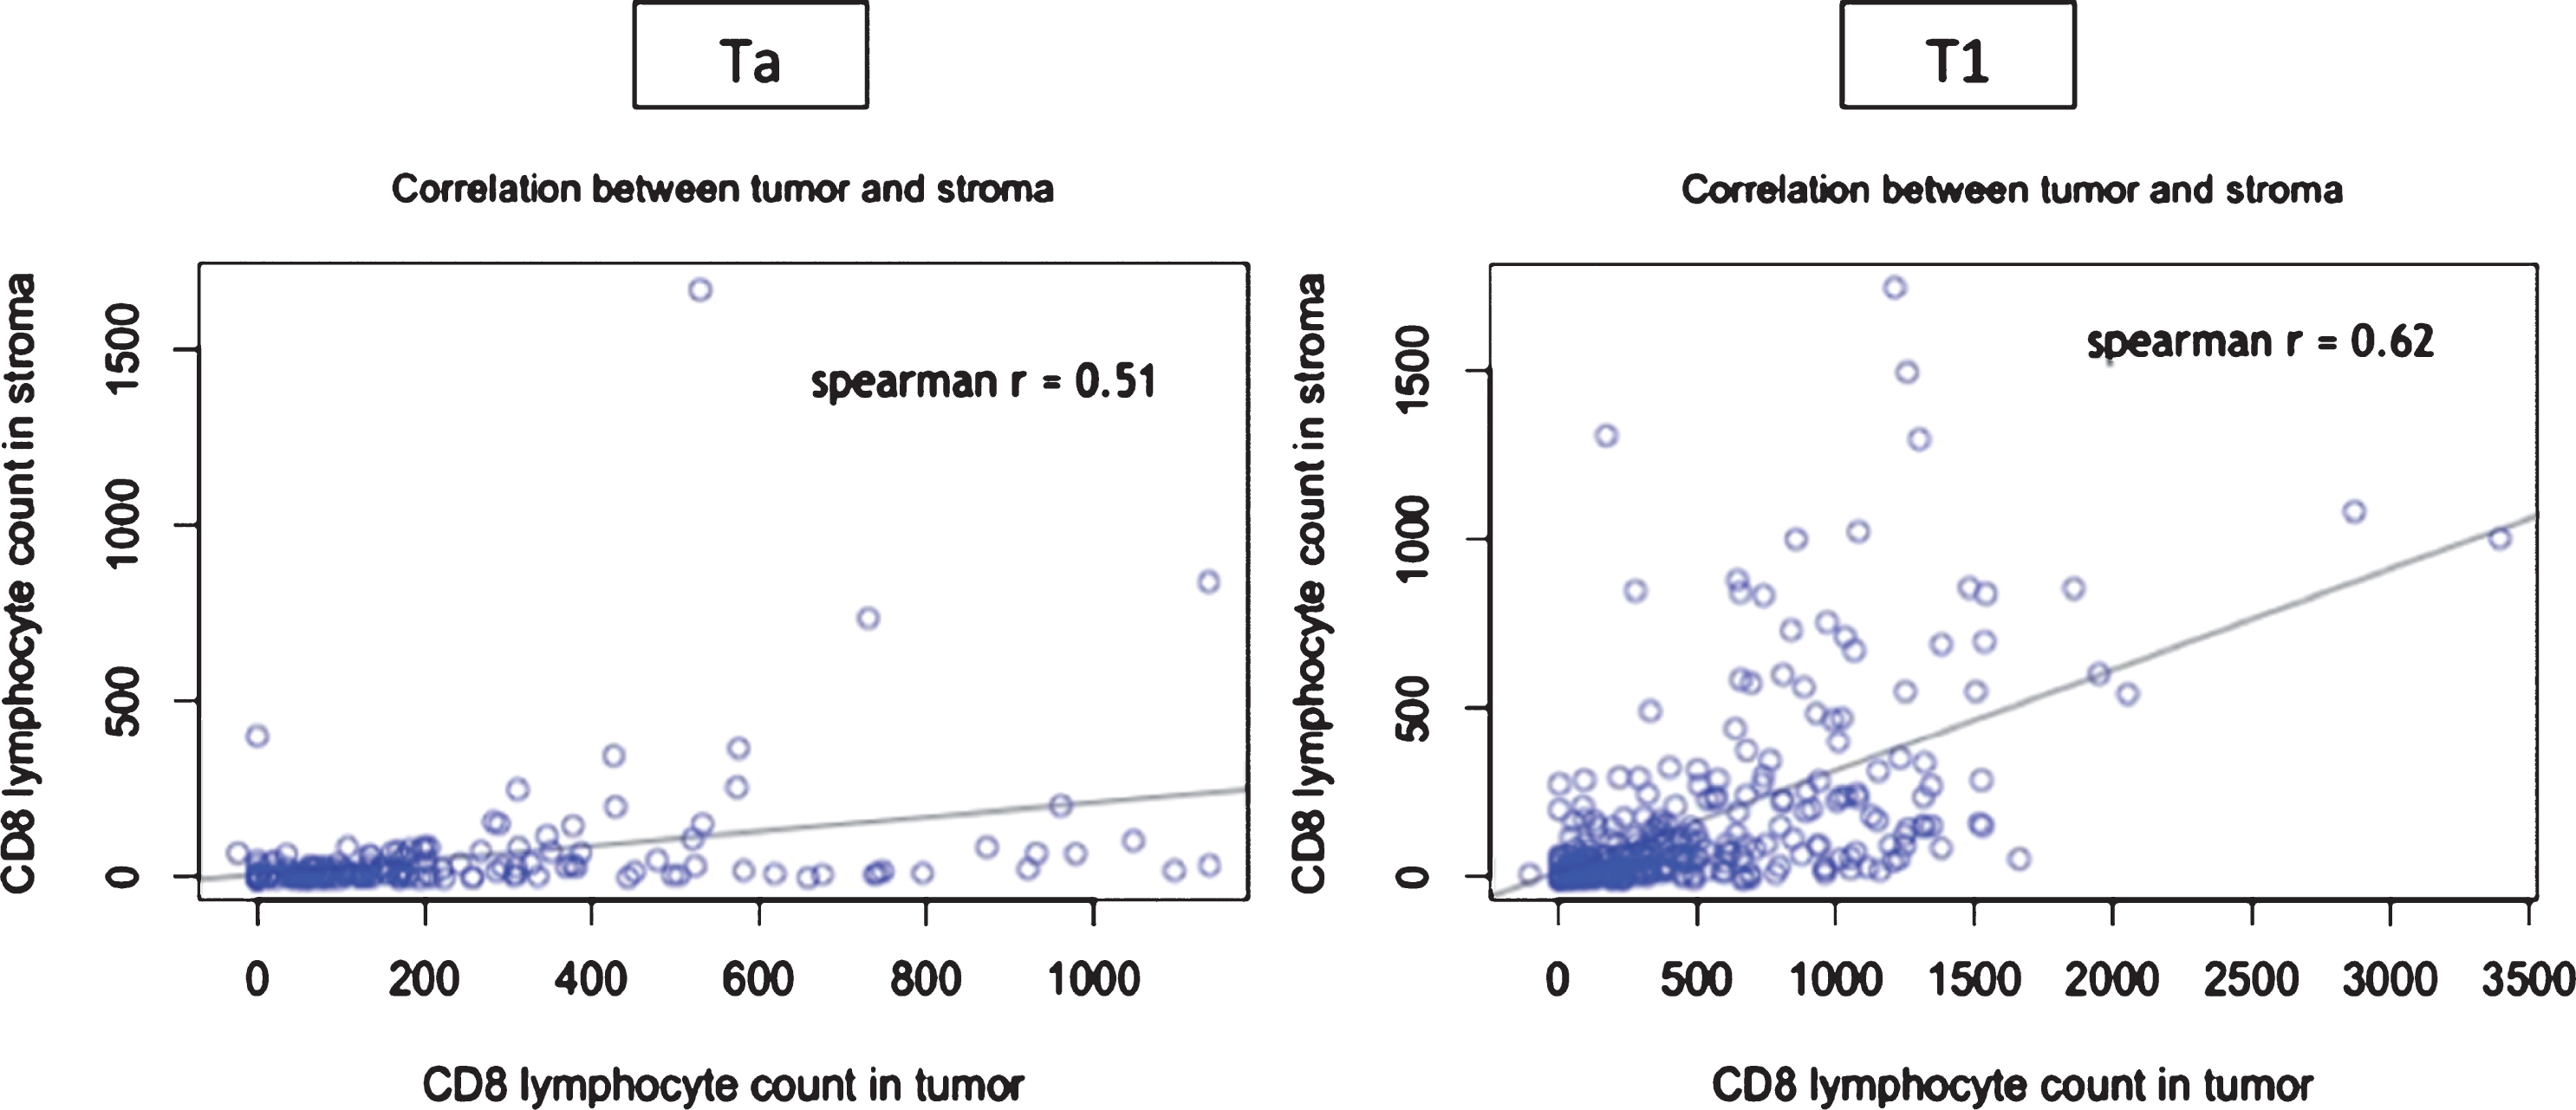 Correlation between tumour and stroma CD8+ count according to tumour stage (Ta vs T1). Each blue spot represents a patient. X-axis figures the CD8 count in the tumor and the Y-axis in the stroma.